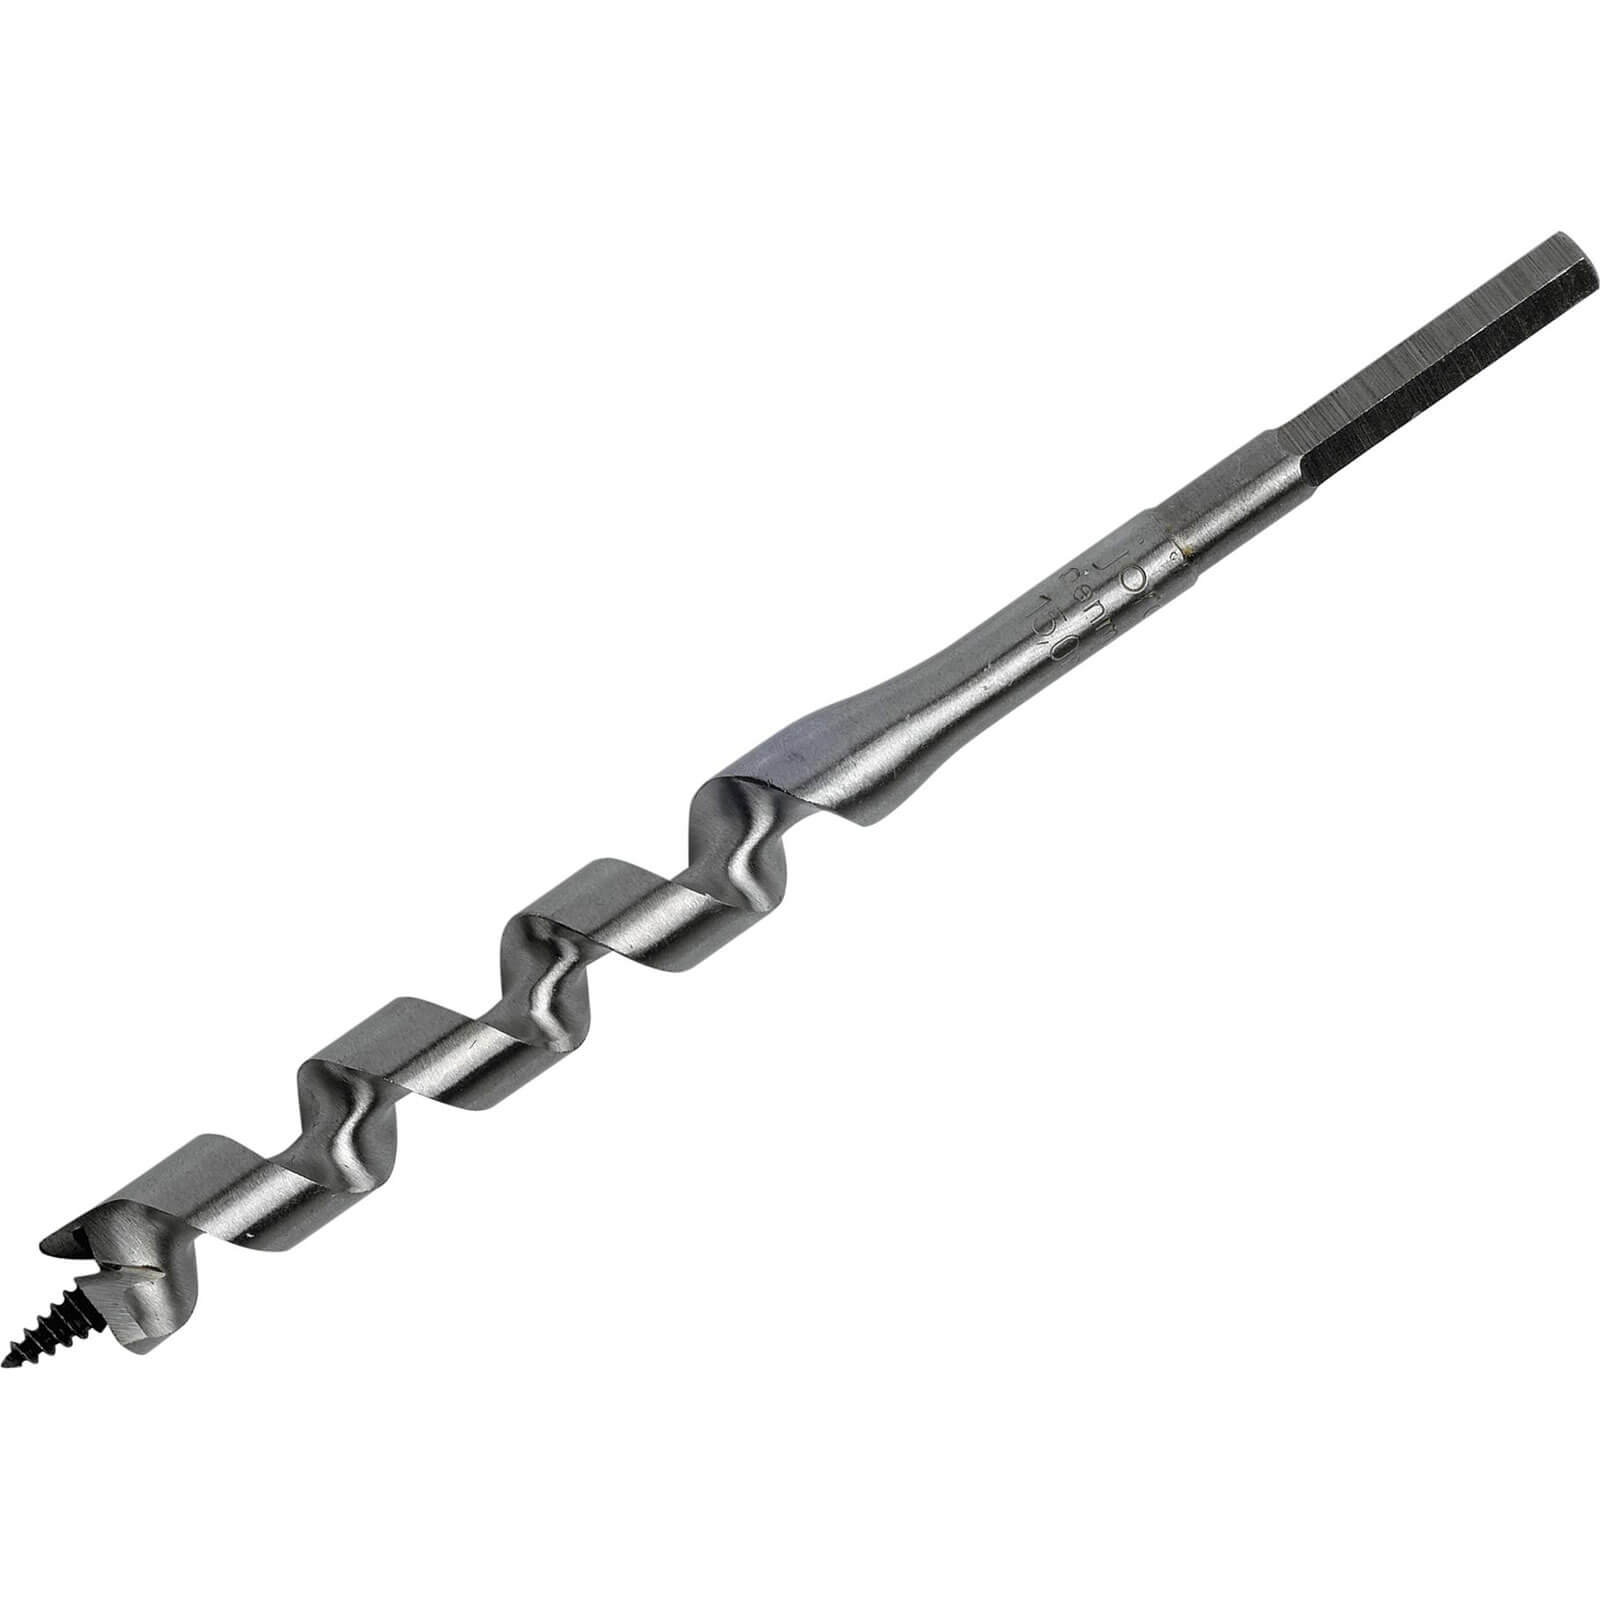 Image of Irwin Wood Auger Drill Bit 17mm 191mm